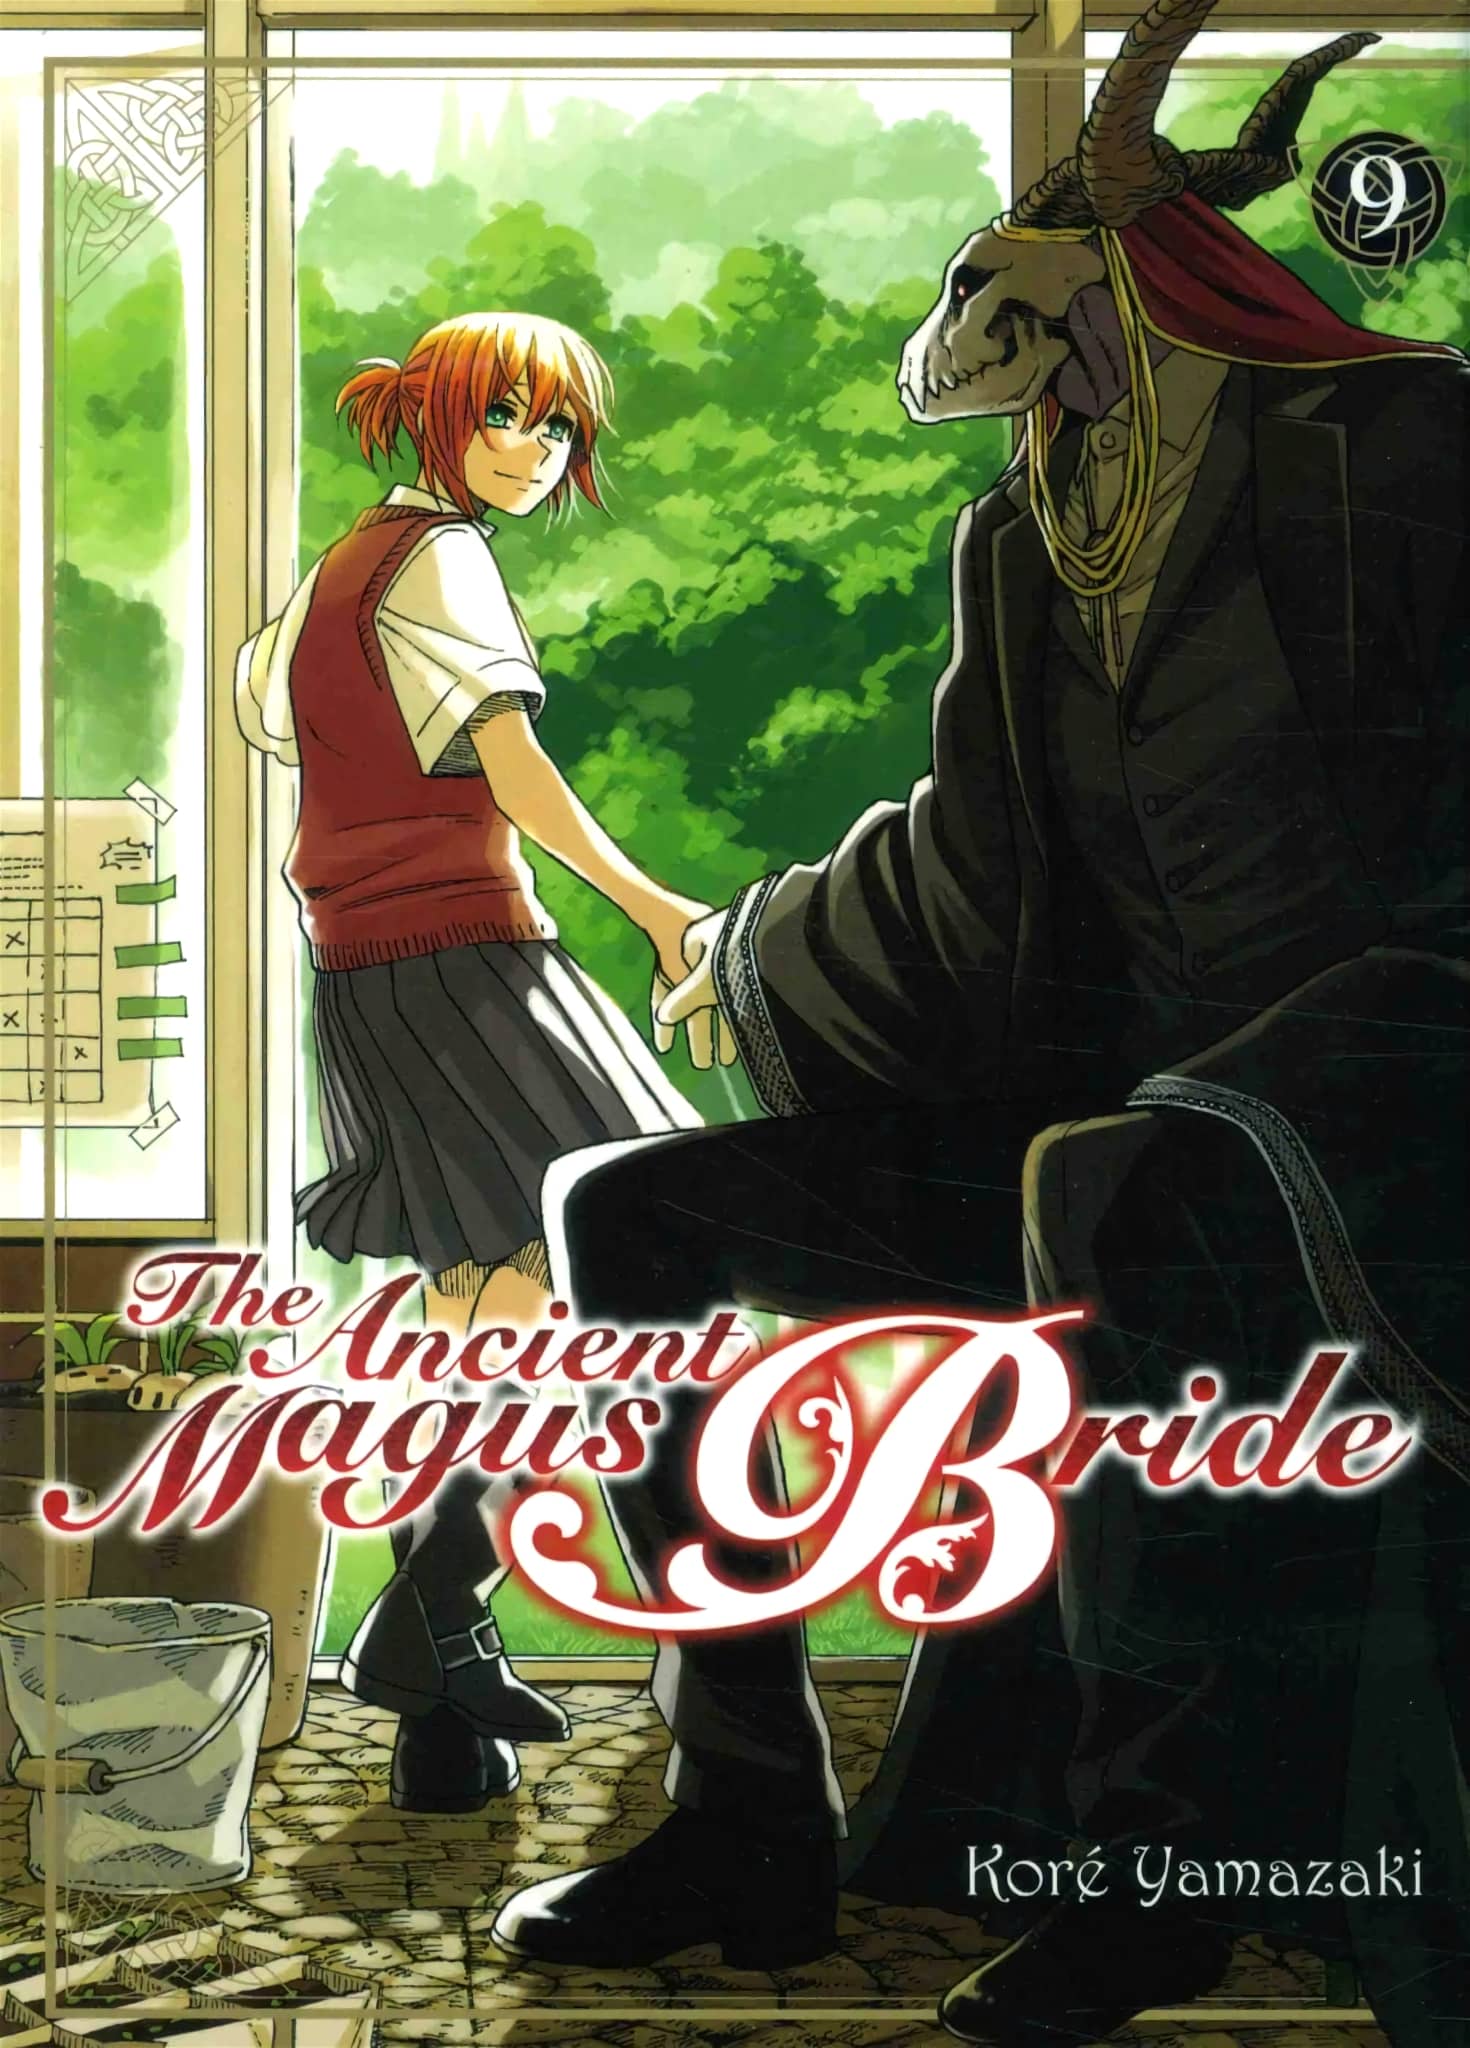 Tome 9 du manga The Ancient Magus Bride